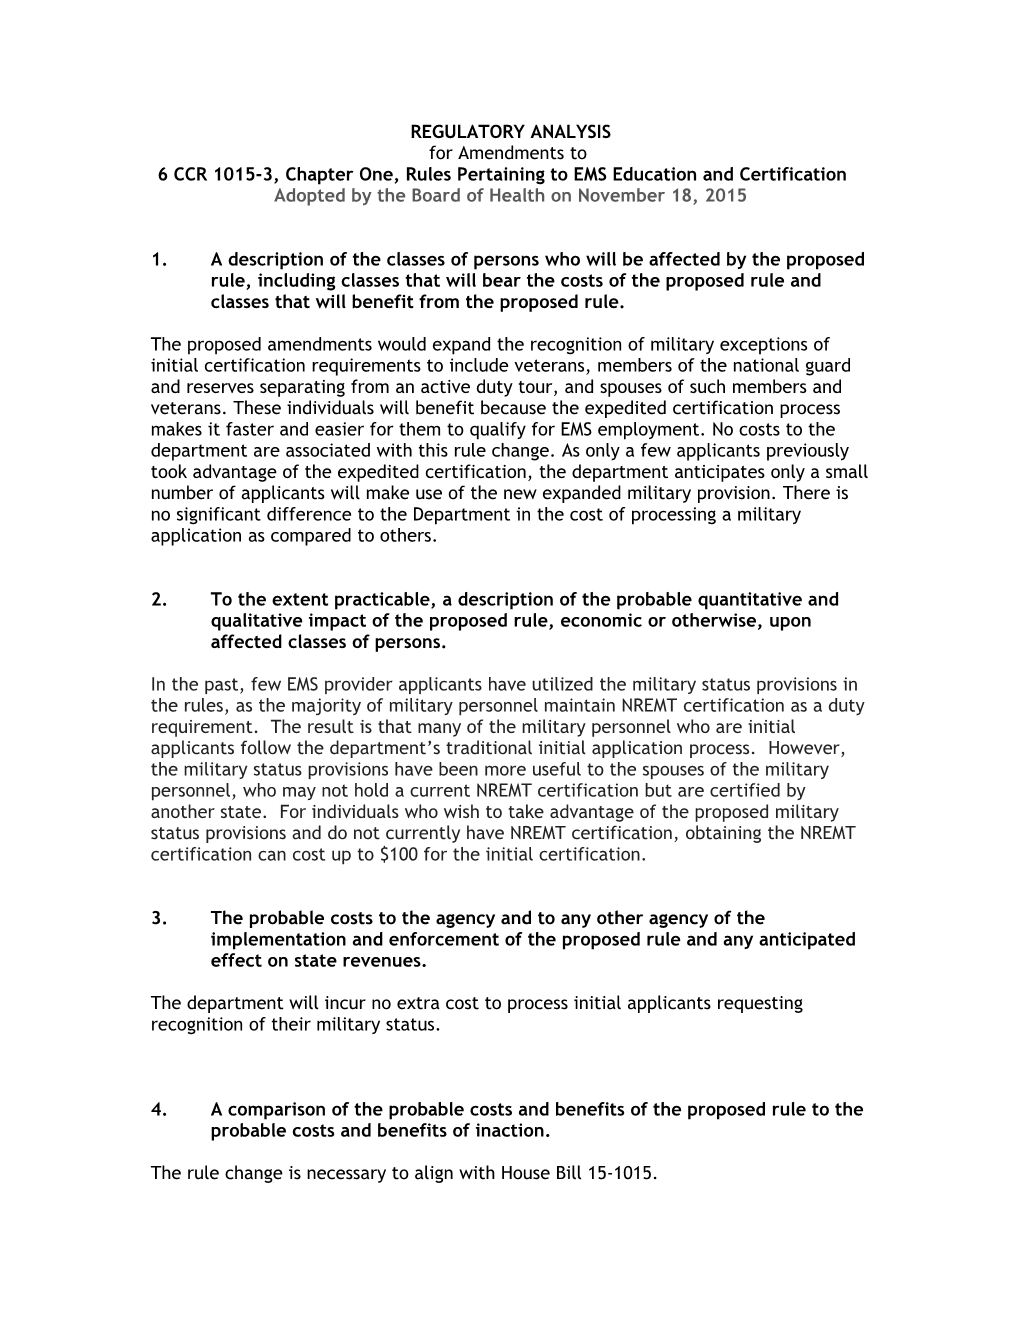 6 CCR 1015-3, Chapter One, Rules Pertaining to EMS Education and Certification